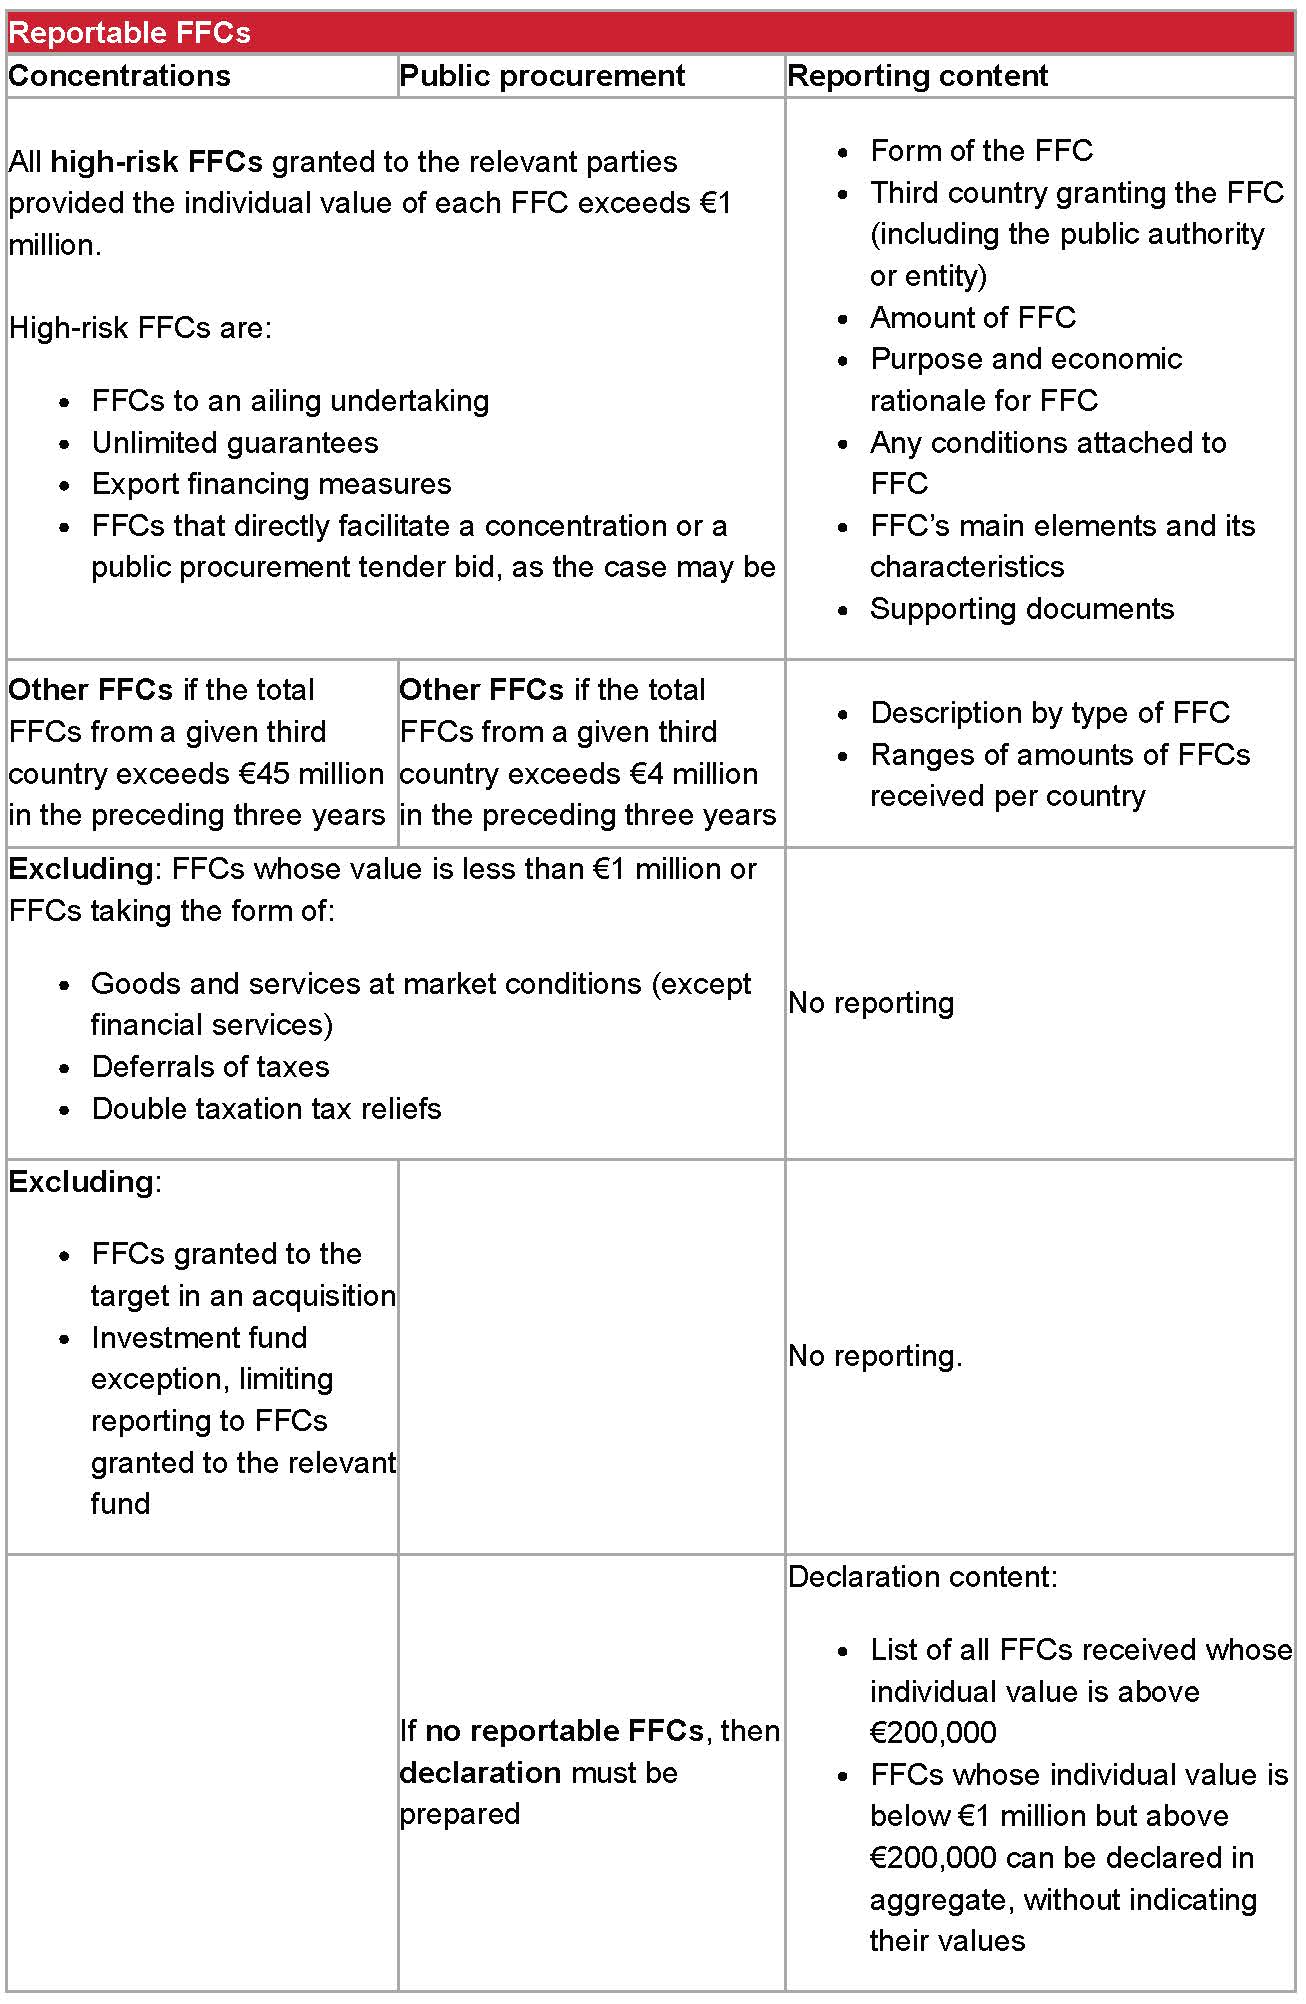 Table detailing Reportable FFCs and FSR reporting obligations